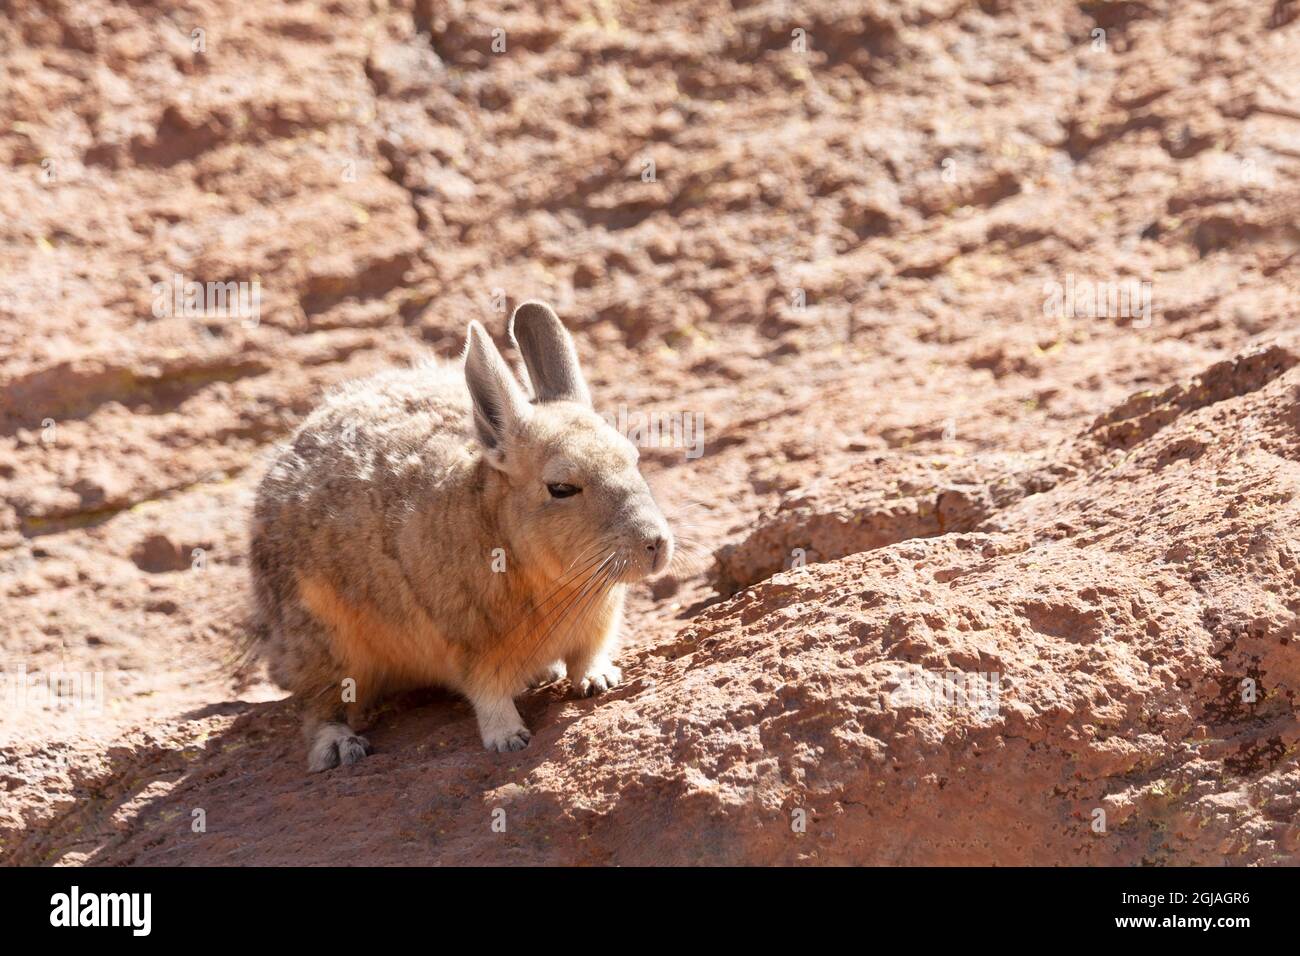 Bolivia, Atacama Desert, viscacha or vizcacha. This rodent is found in rocky areas in Bolivia. Stock Photo